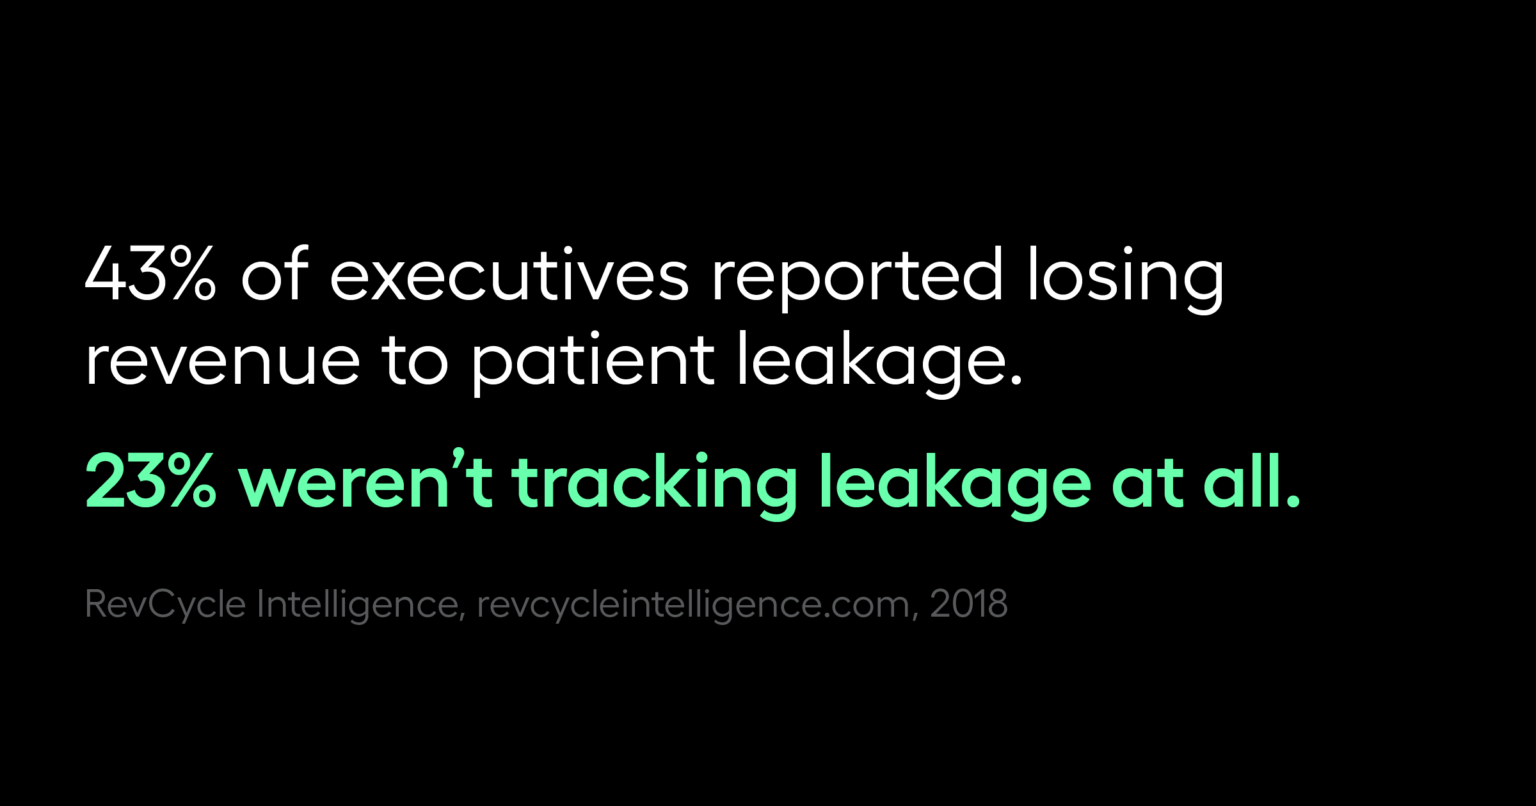 43% of executives report losing revenue to patient leakage